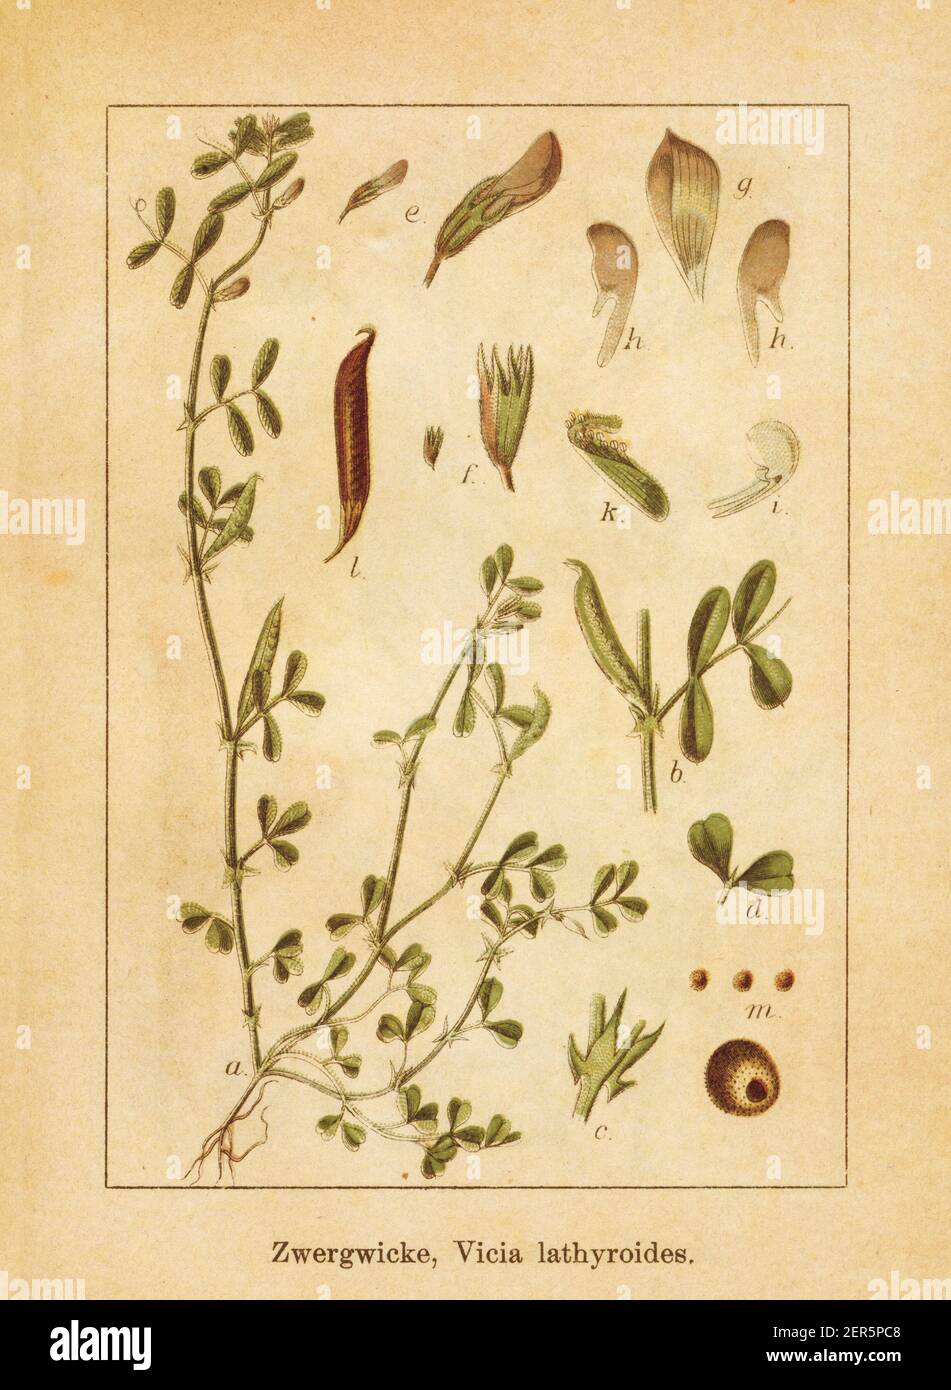 Antique illustration of a vicia lathyroides, also known as spring vetch. Engraved by Jacob Sturm (1771-1848) and published in the book Deutschlands Fl Stock Photo